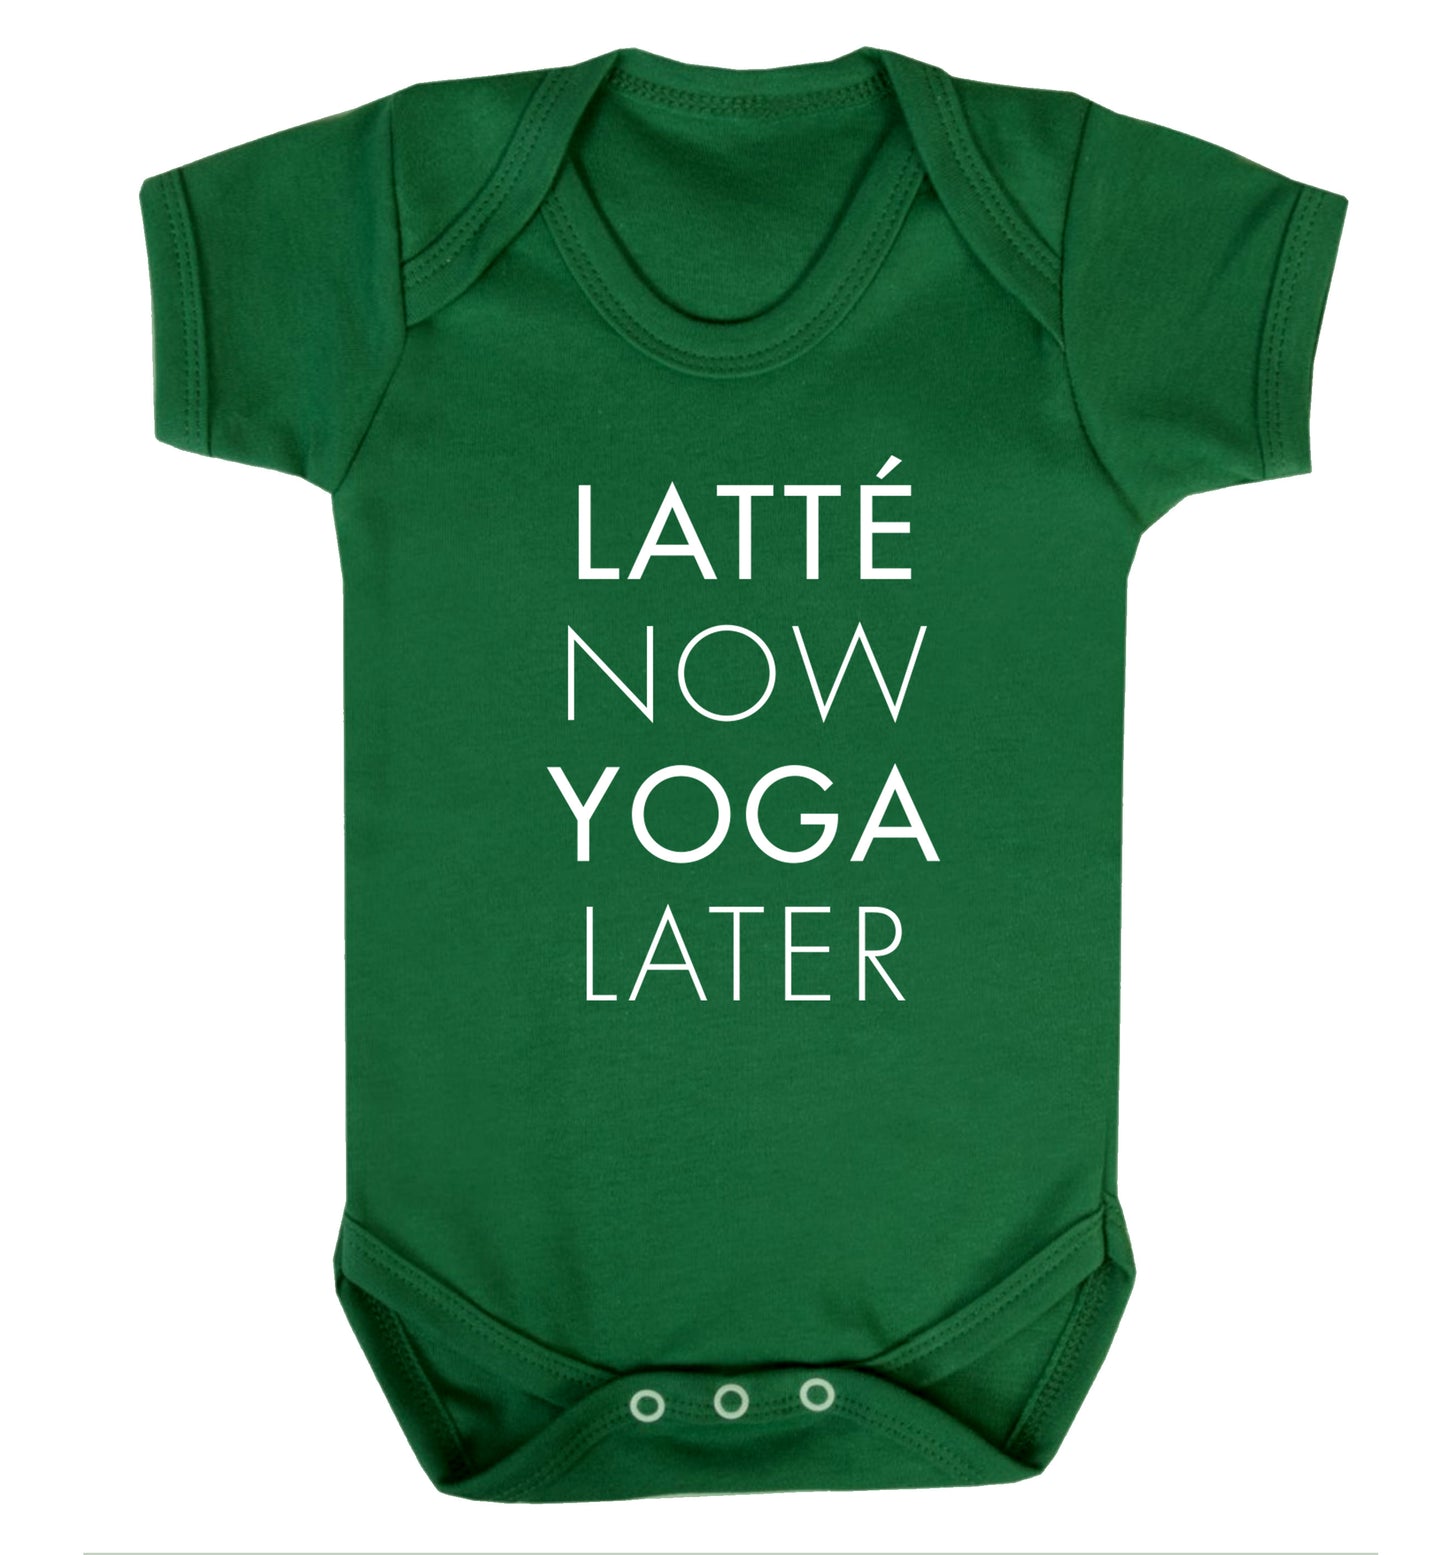 Latte now yoga later Baby Vest green 18-24 months